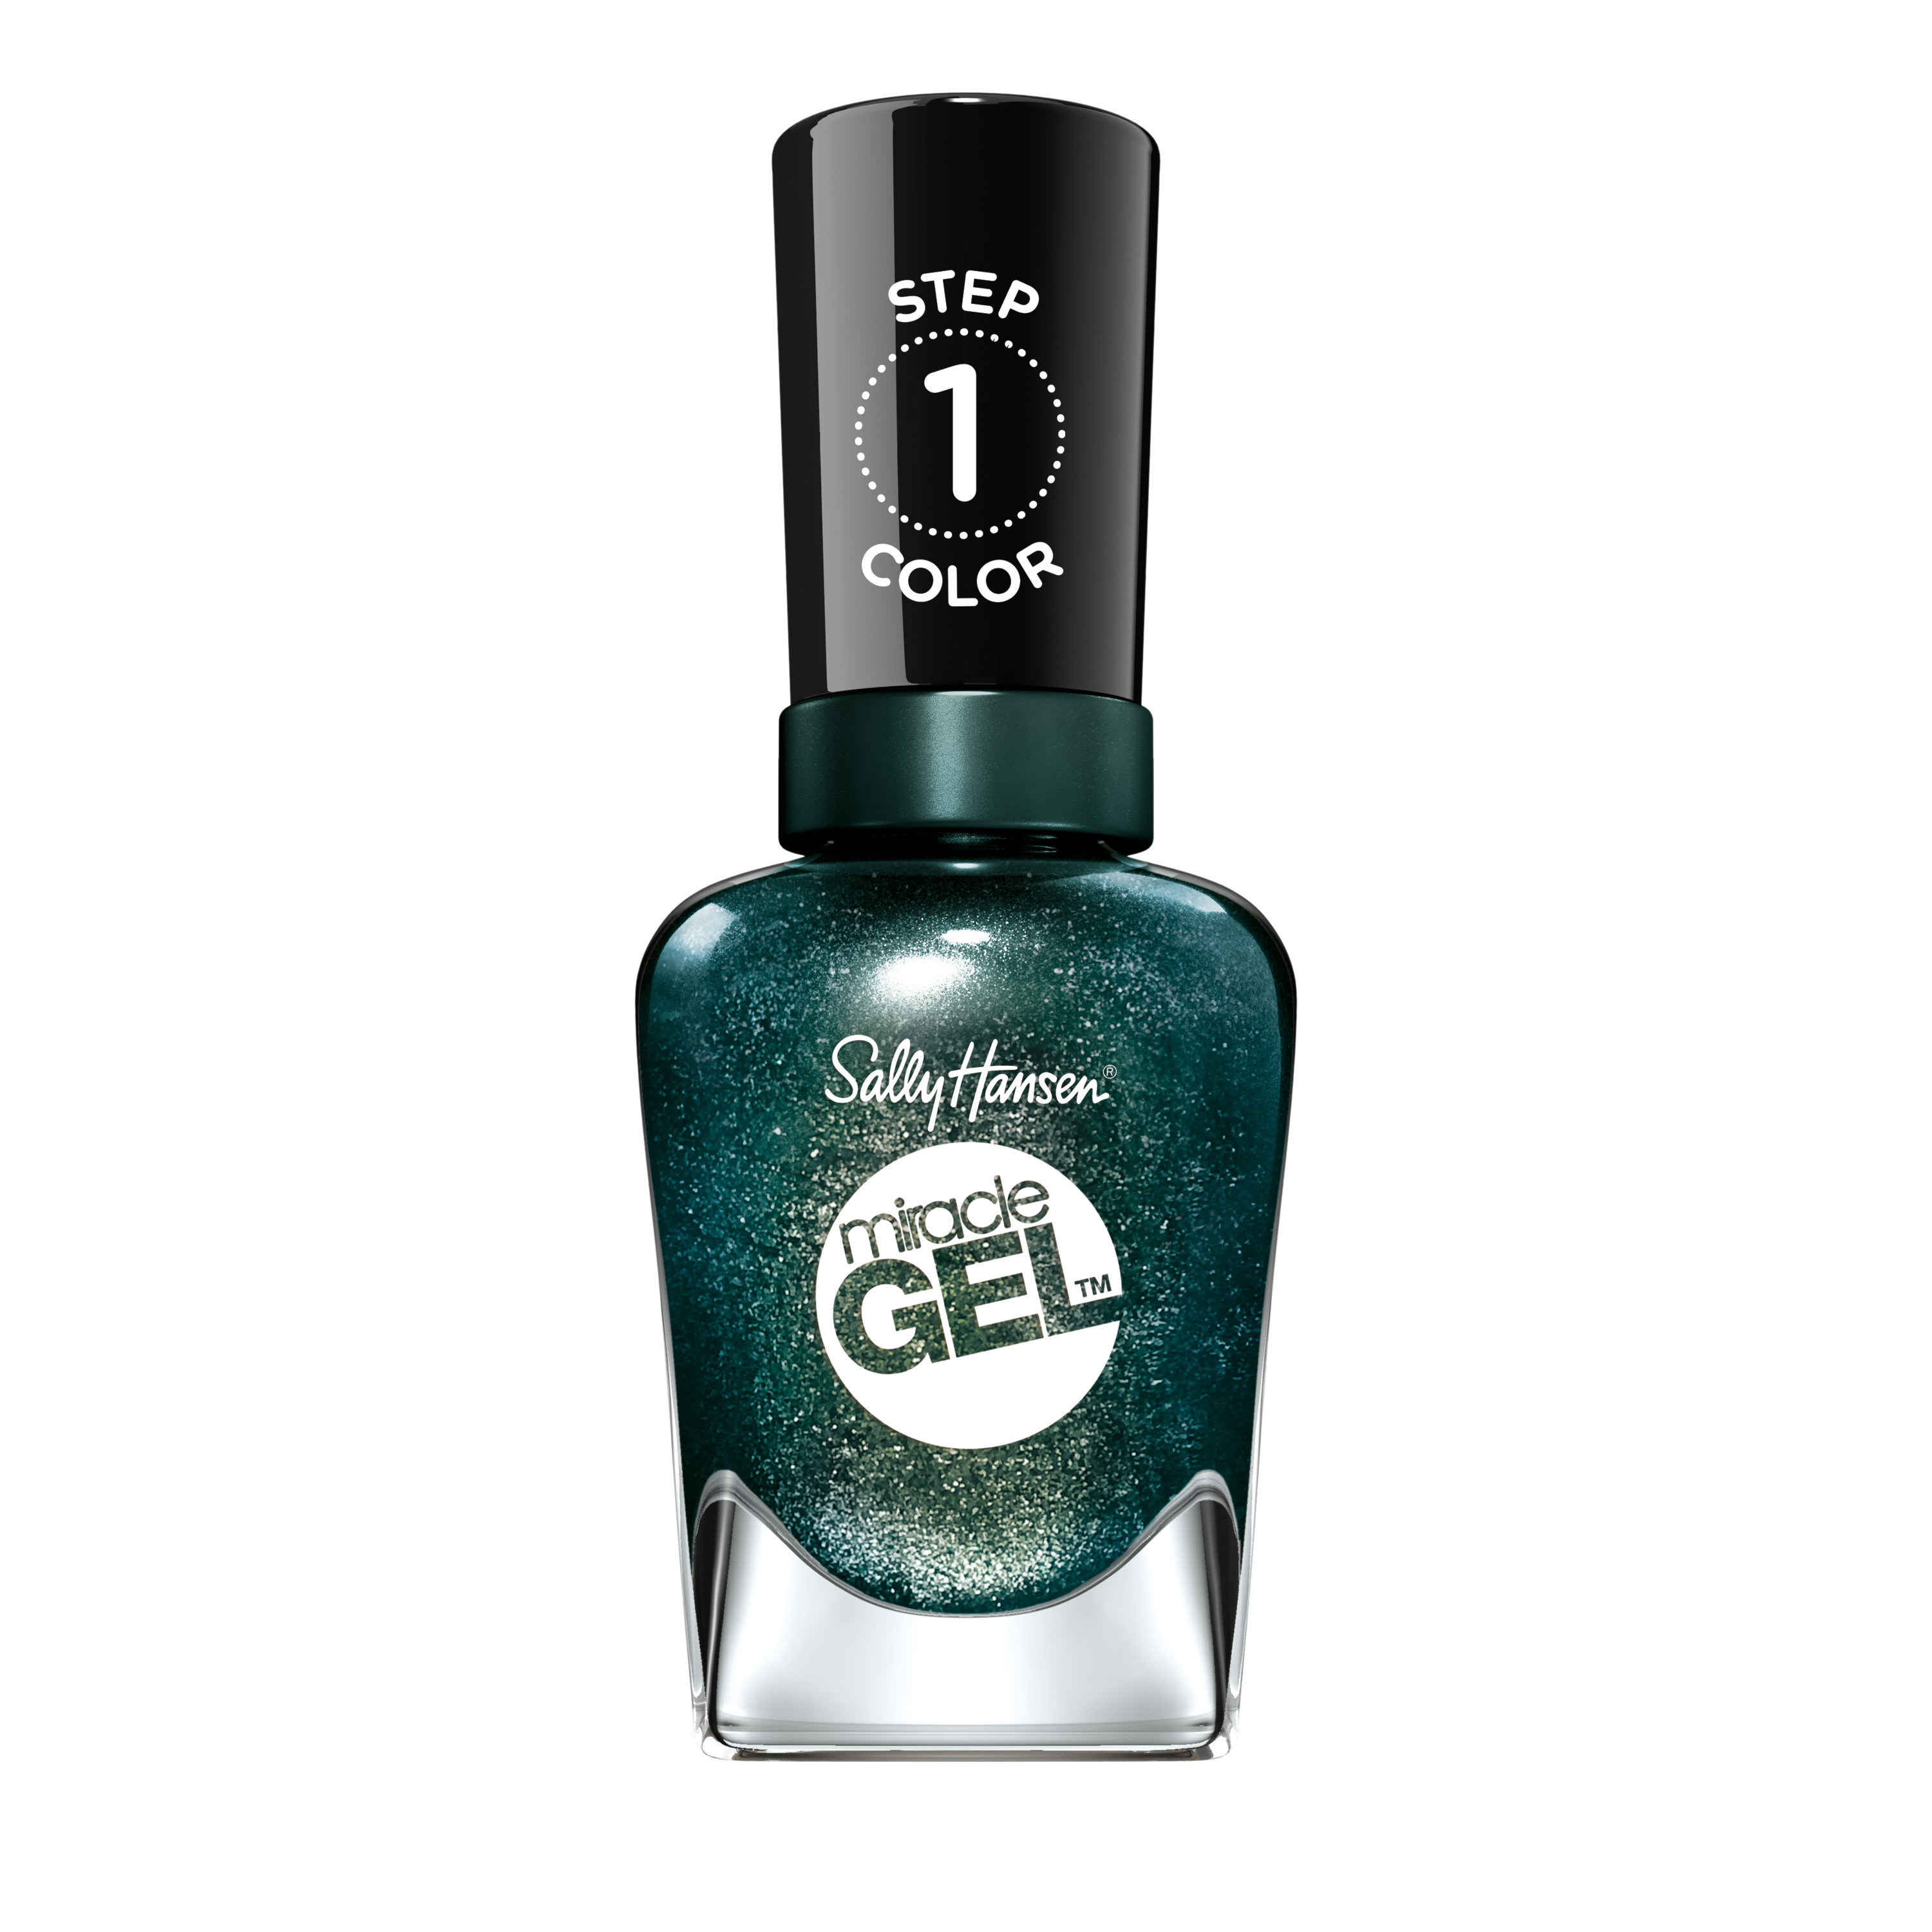 Sally Hansen Miracle Gel Nail Color, Neblue-La, 0.5 oz, At Home Gel Nail Polish, Gel Nail Polish, No UV Lamp Needed, Long Lasting, Chip Resistant - image 1 of 3